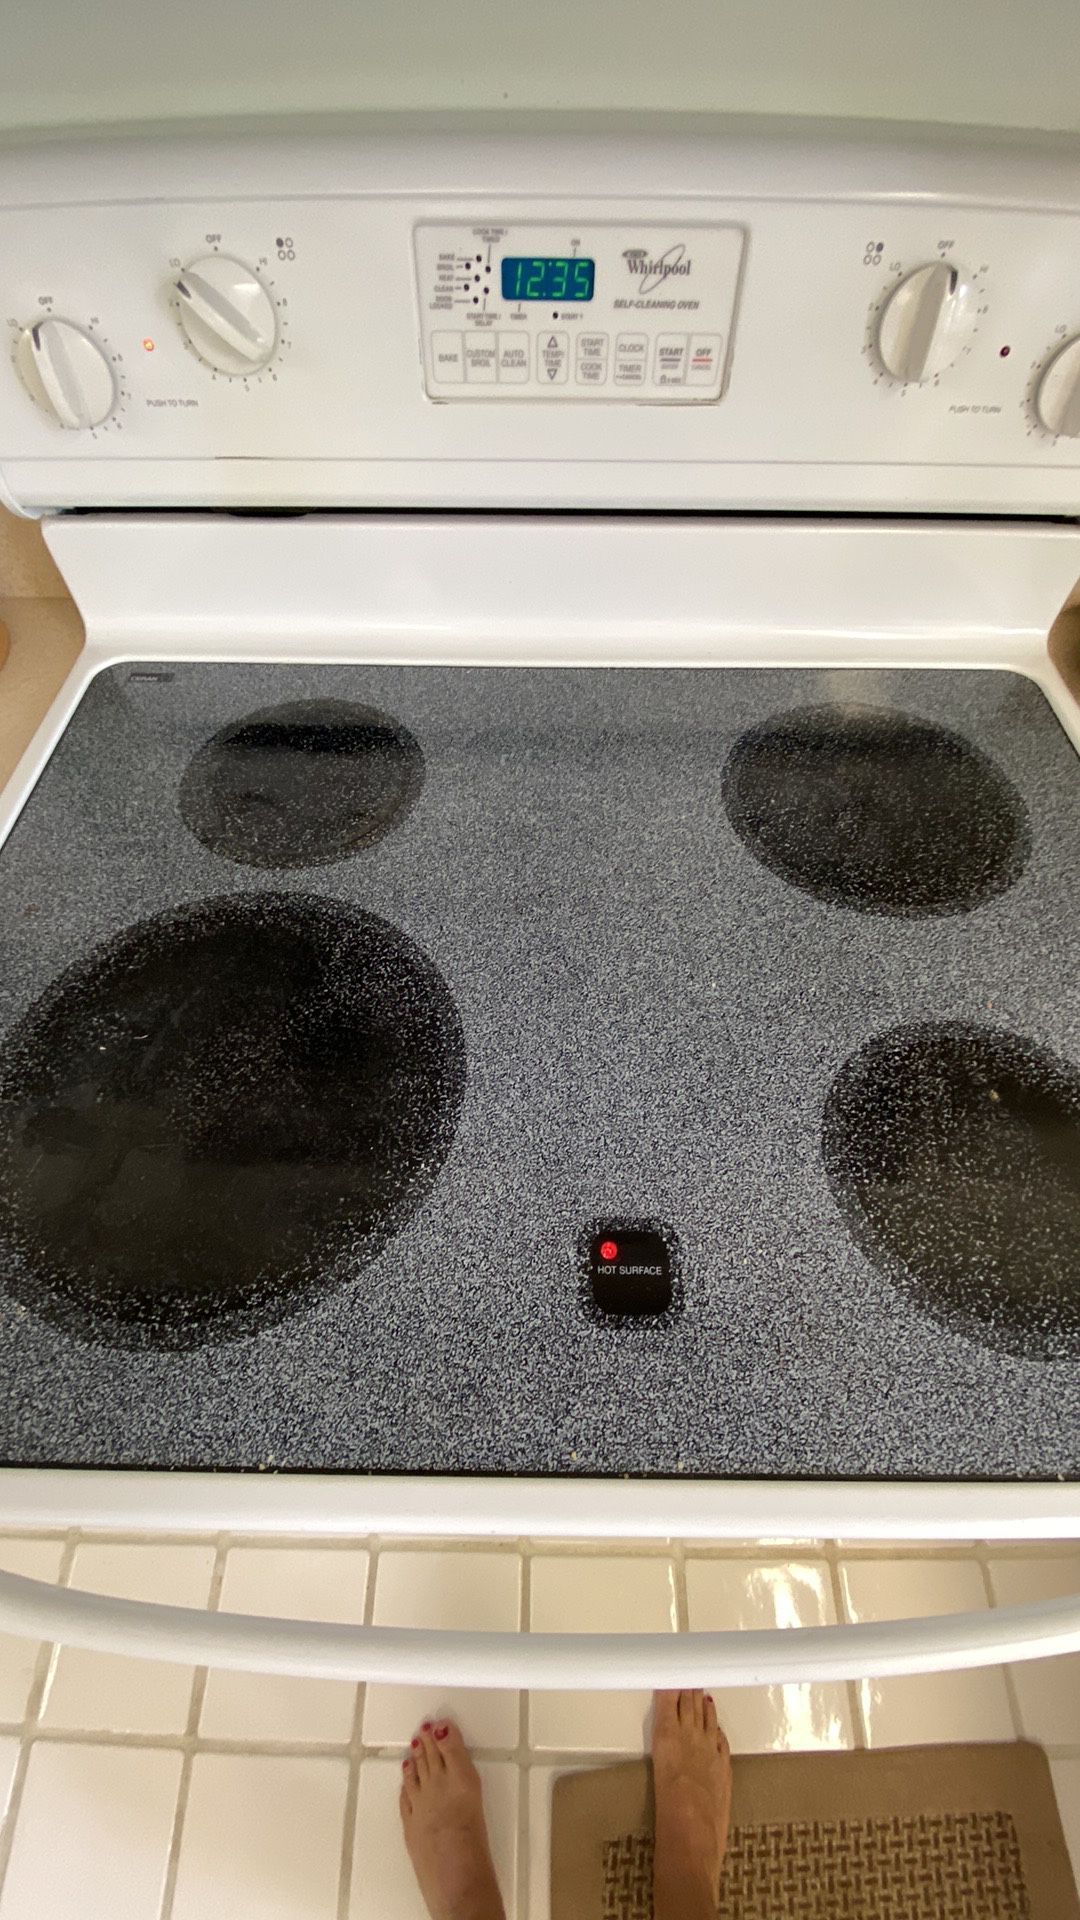 Stovetop Oven